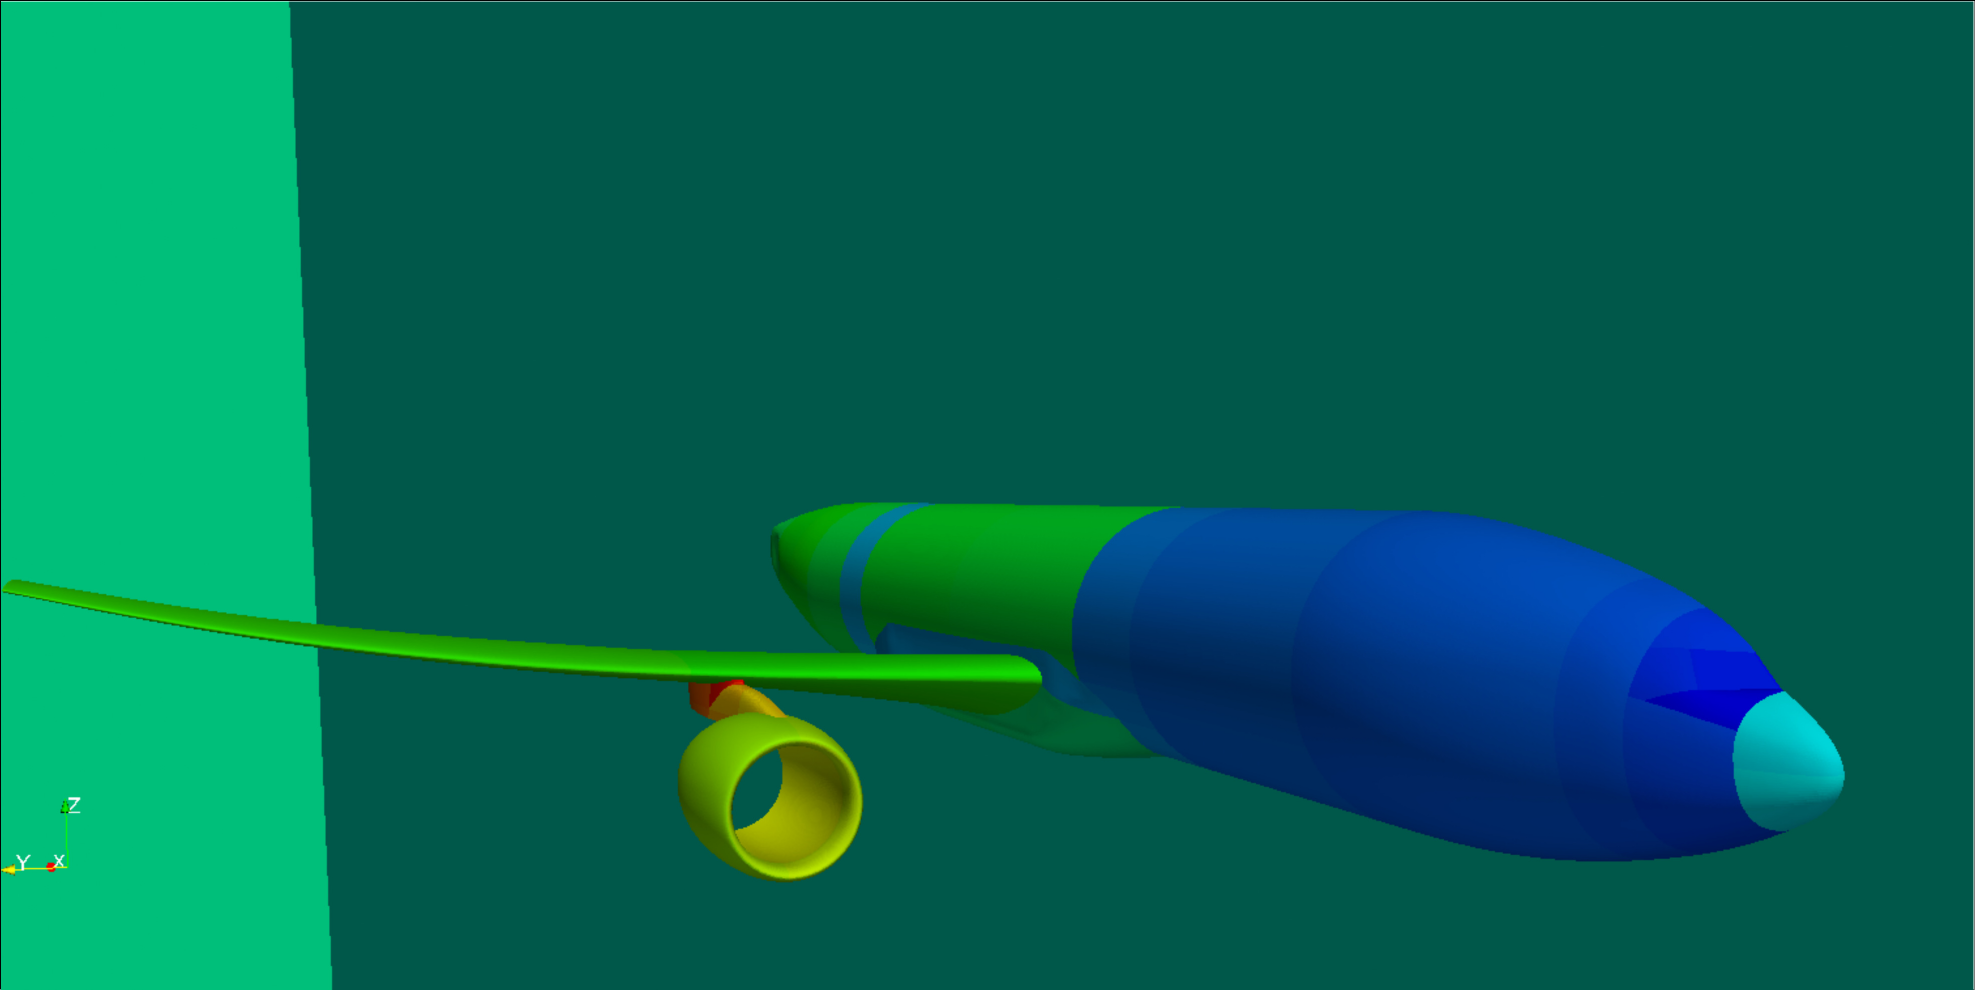 Boeing1-eps-converted-to.png